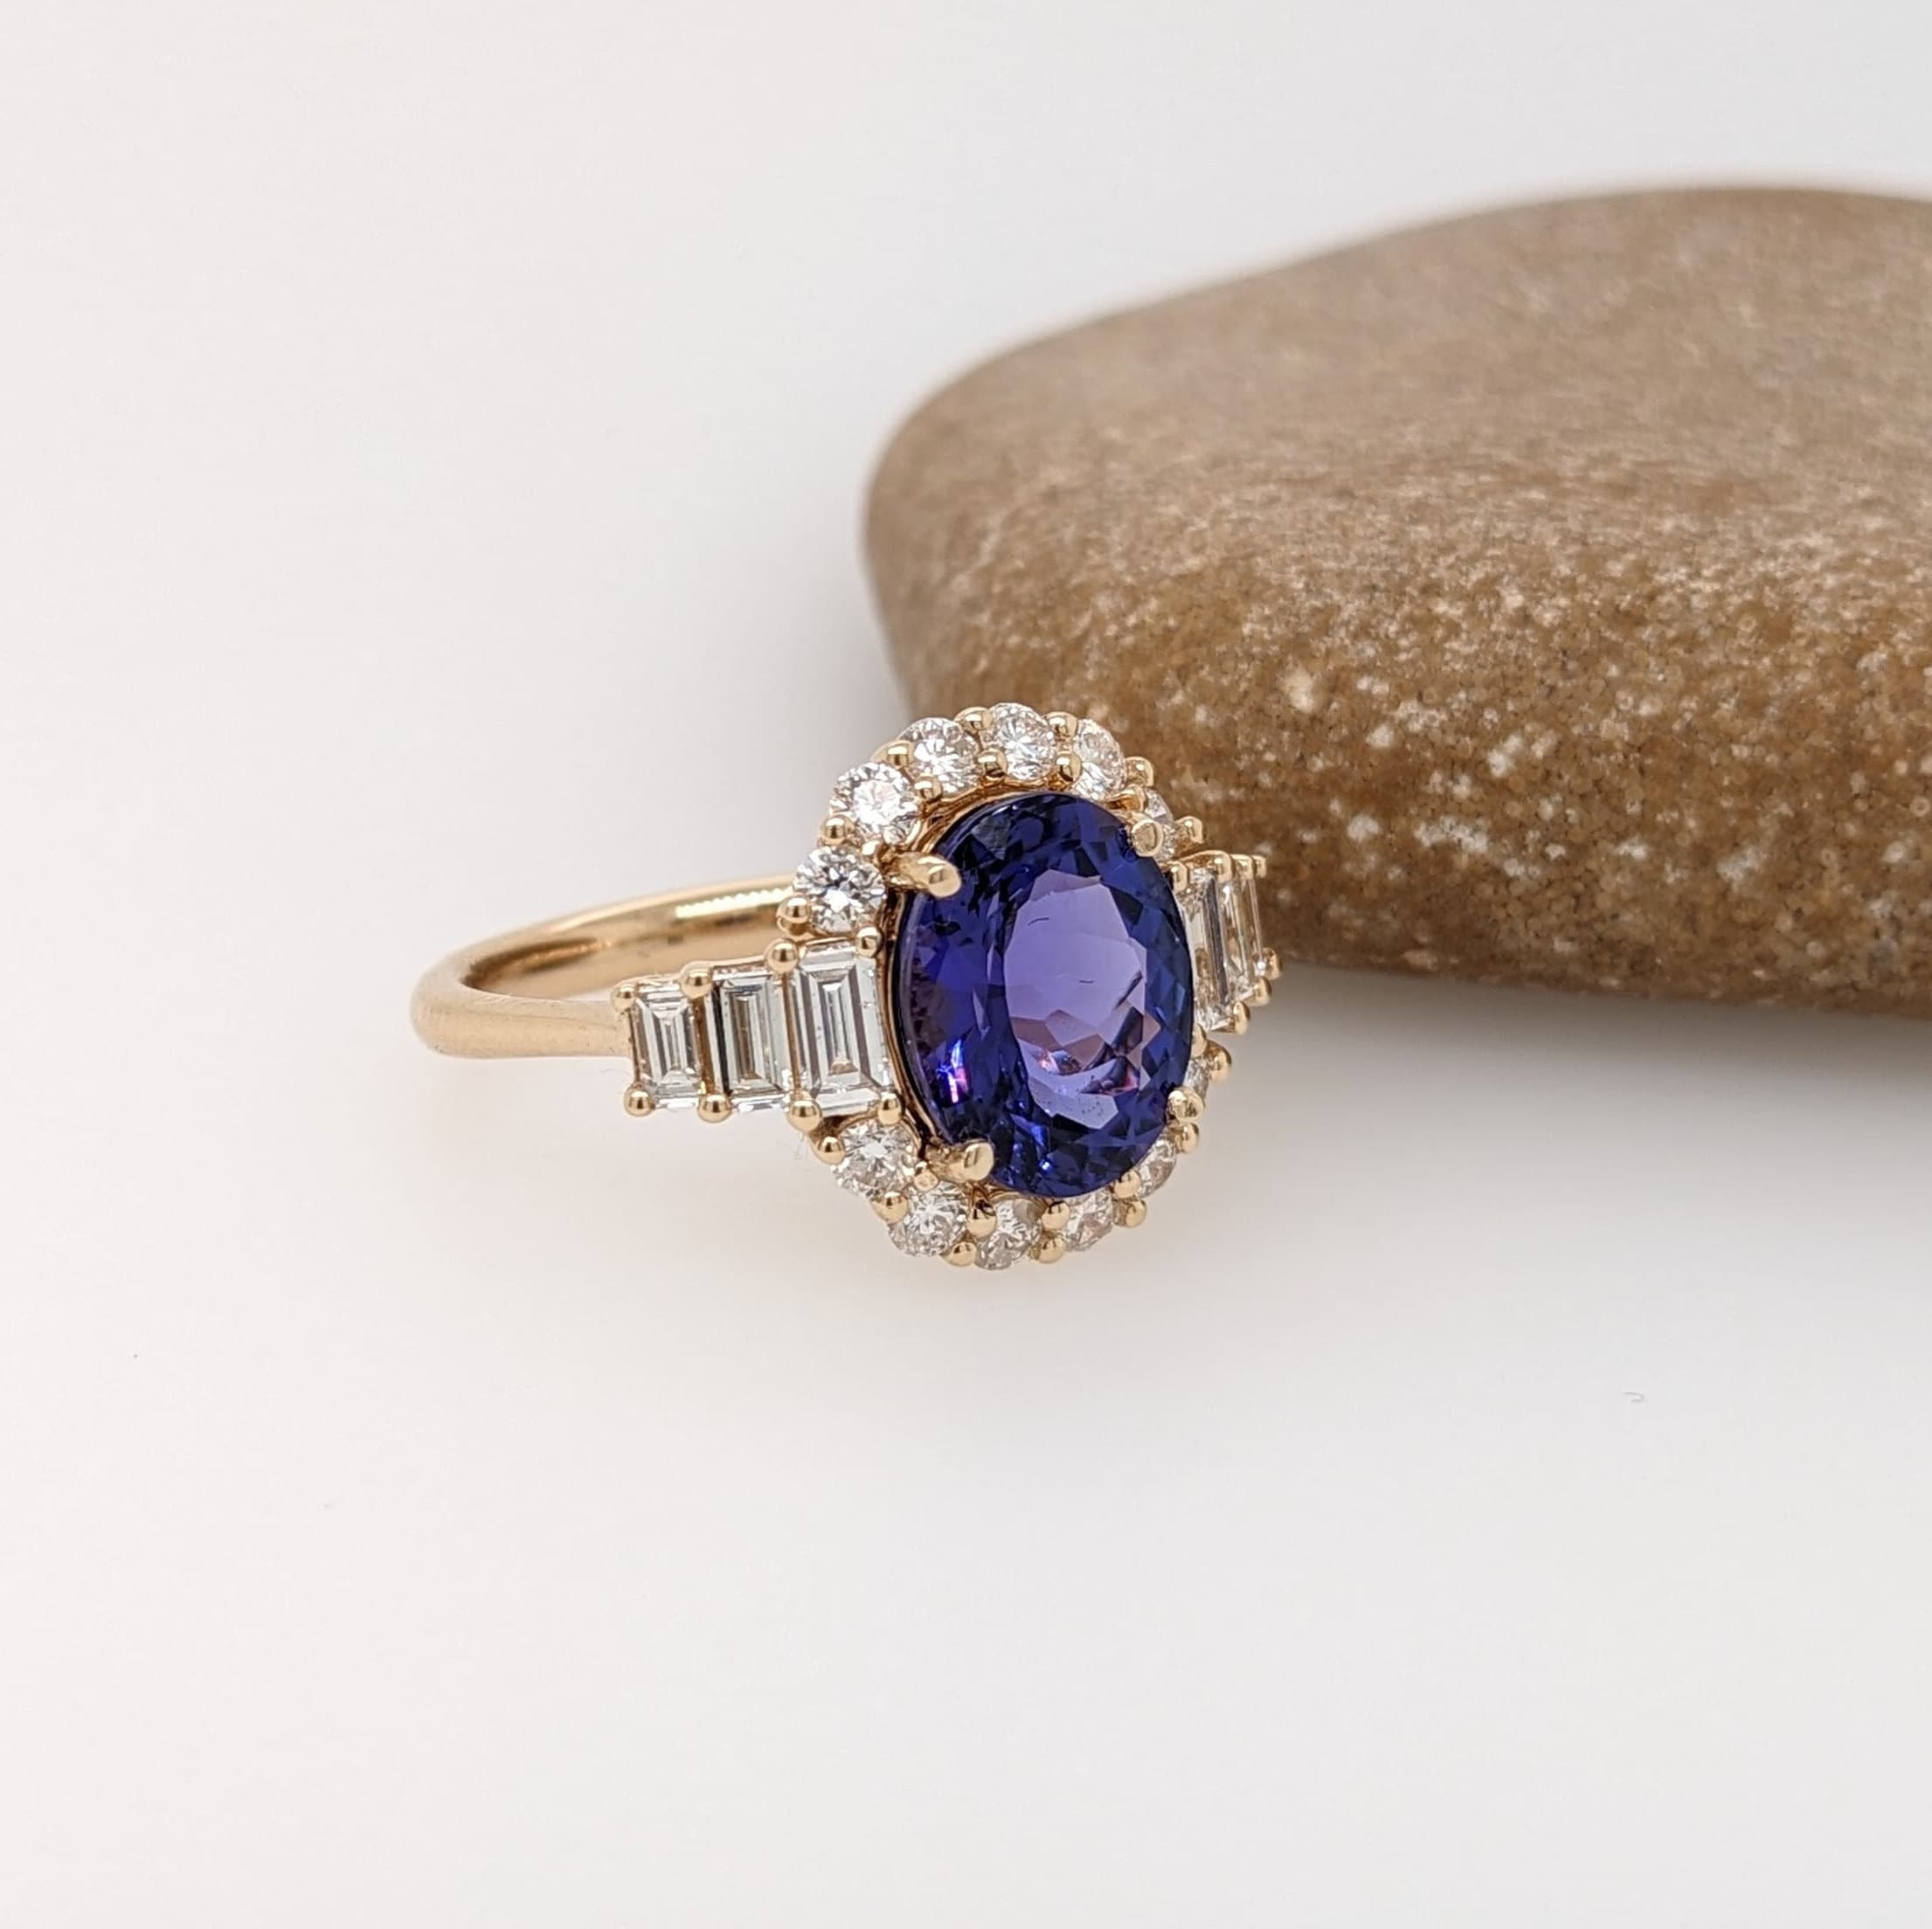 Bespoke 3 Carat Tanzanite and Diamond Ring in Solid 14k Yellow Gold | Oval 9x7mm | Baguette & Round Diamonds | Engagement | Statement